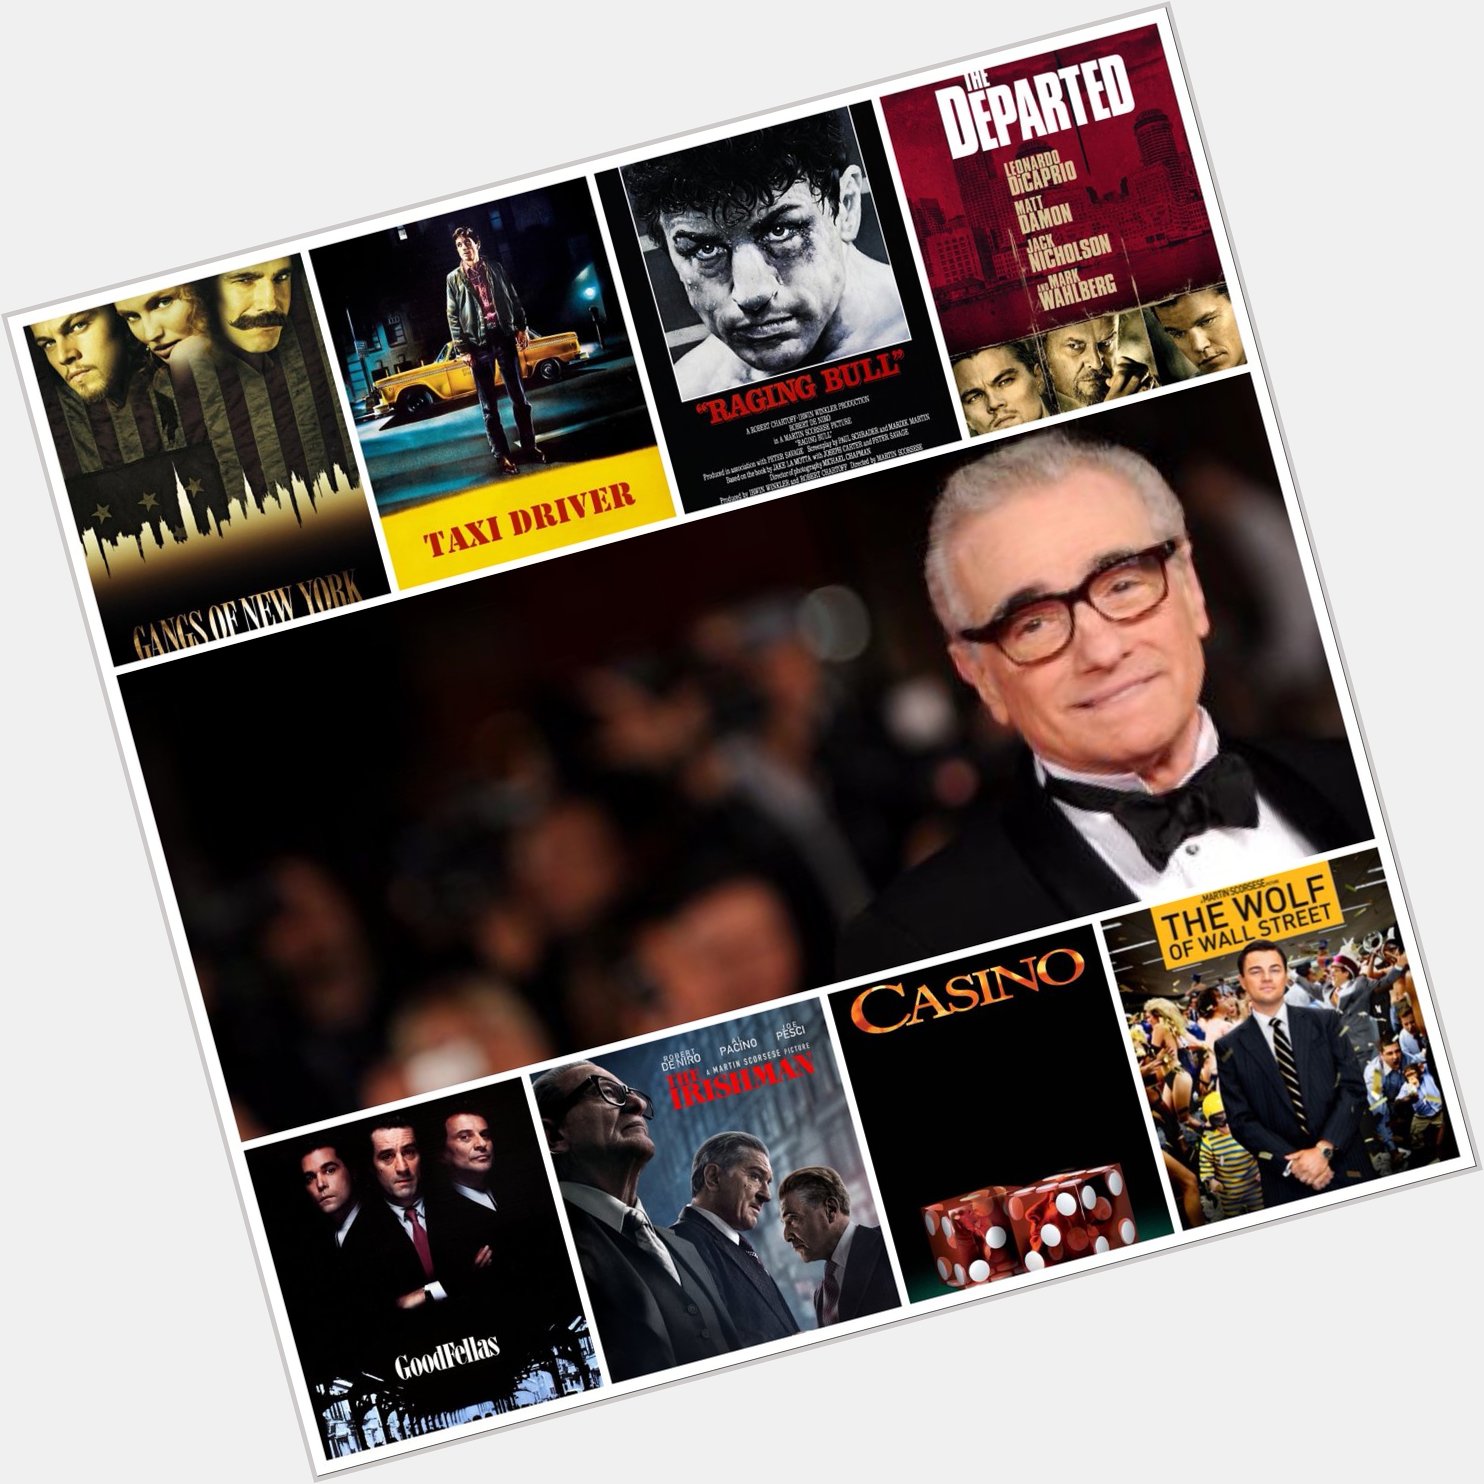 Happy Birthday, Martin Scorsese! The maestro turns 80 years old today! What is his best film? 